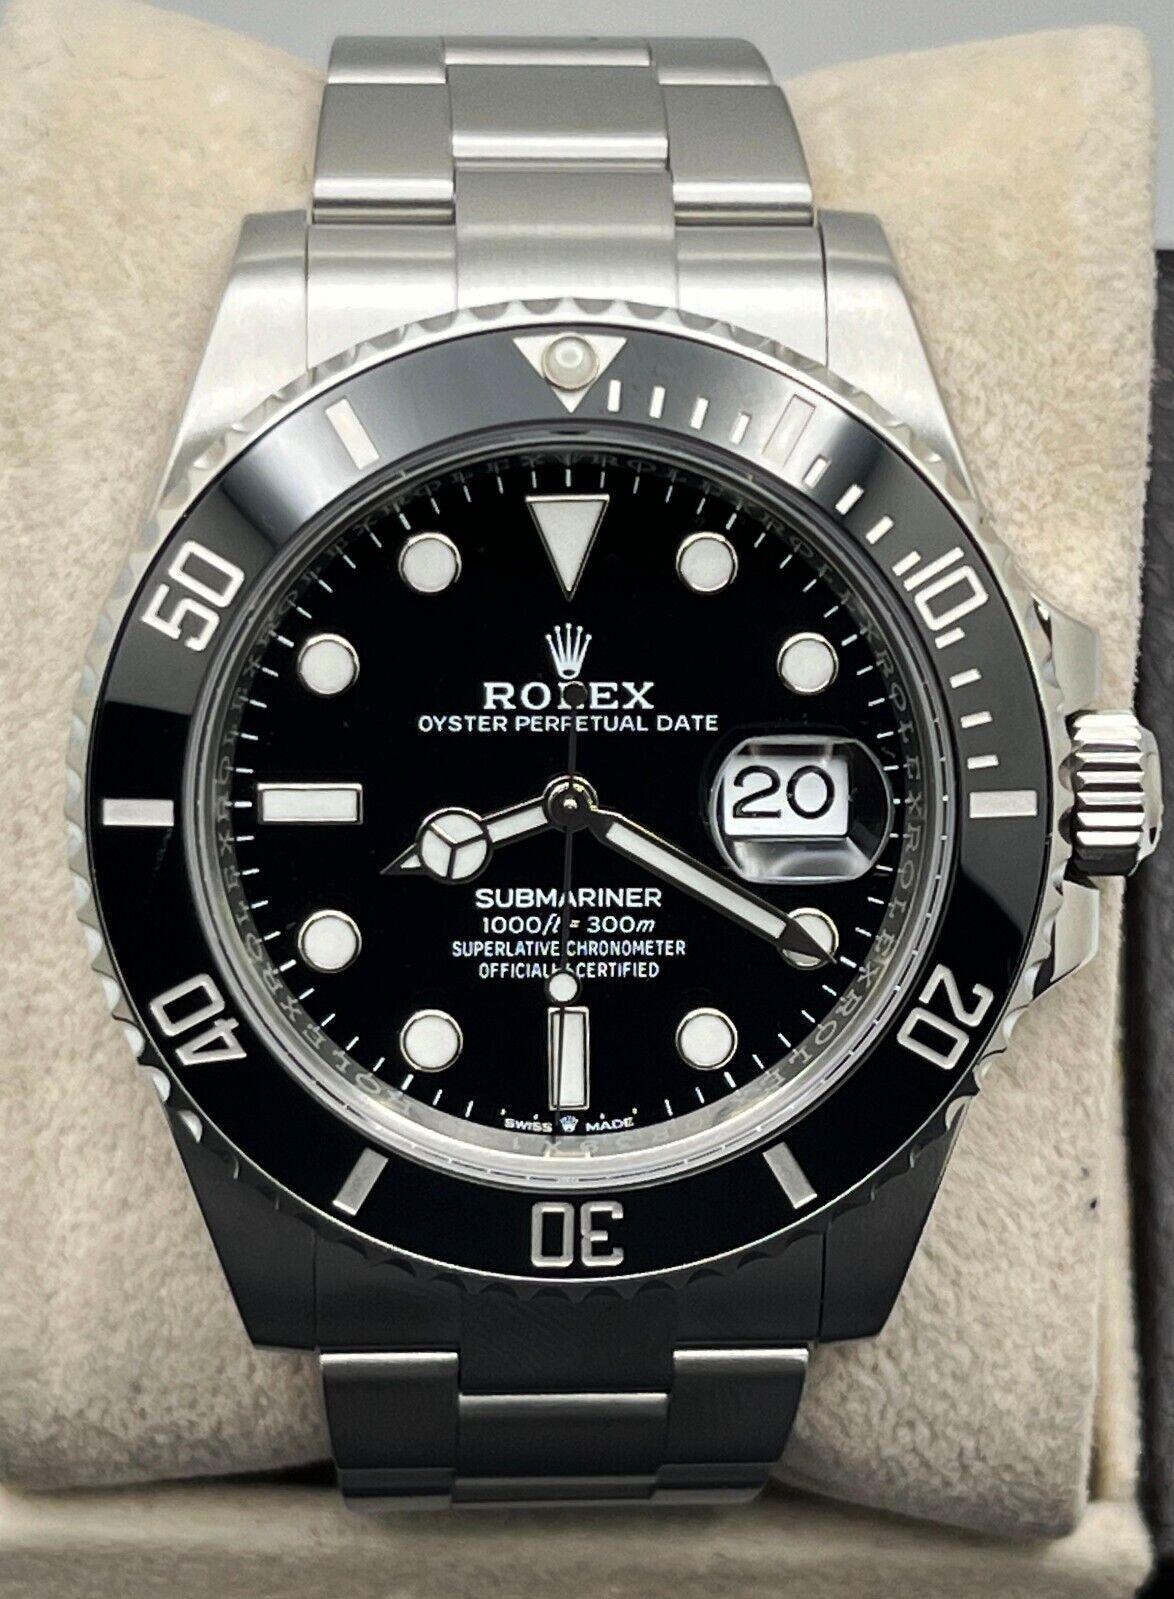 Rolex Submariner 126610 41mm Black Dial Stainless Steel Box Papers 2021 For Sale 2